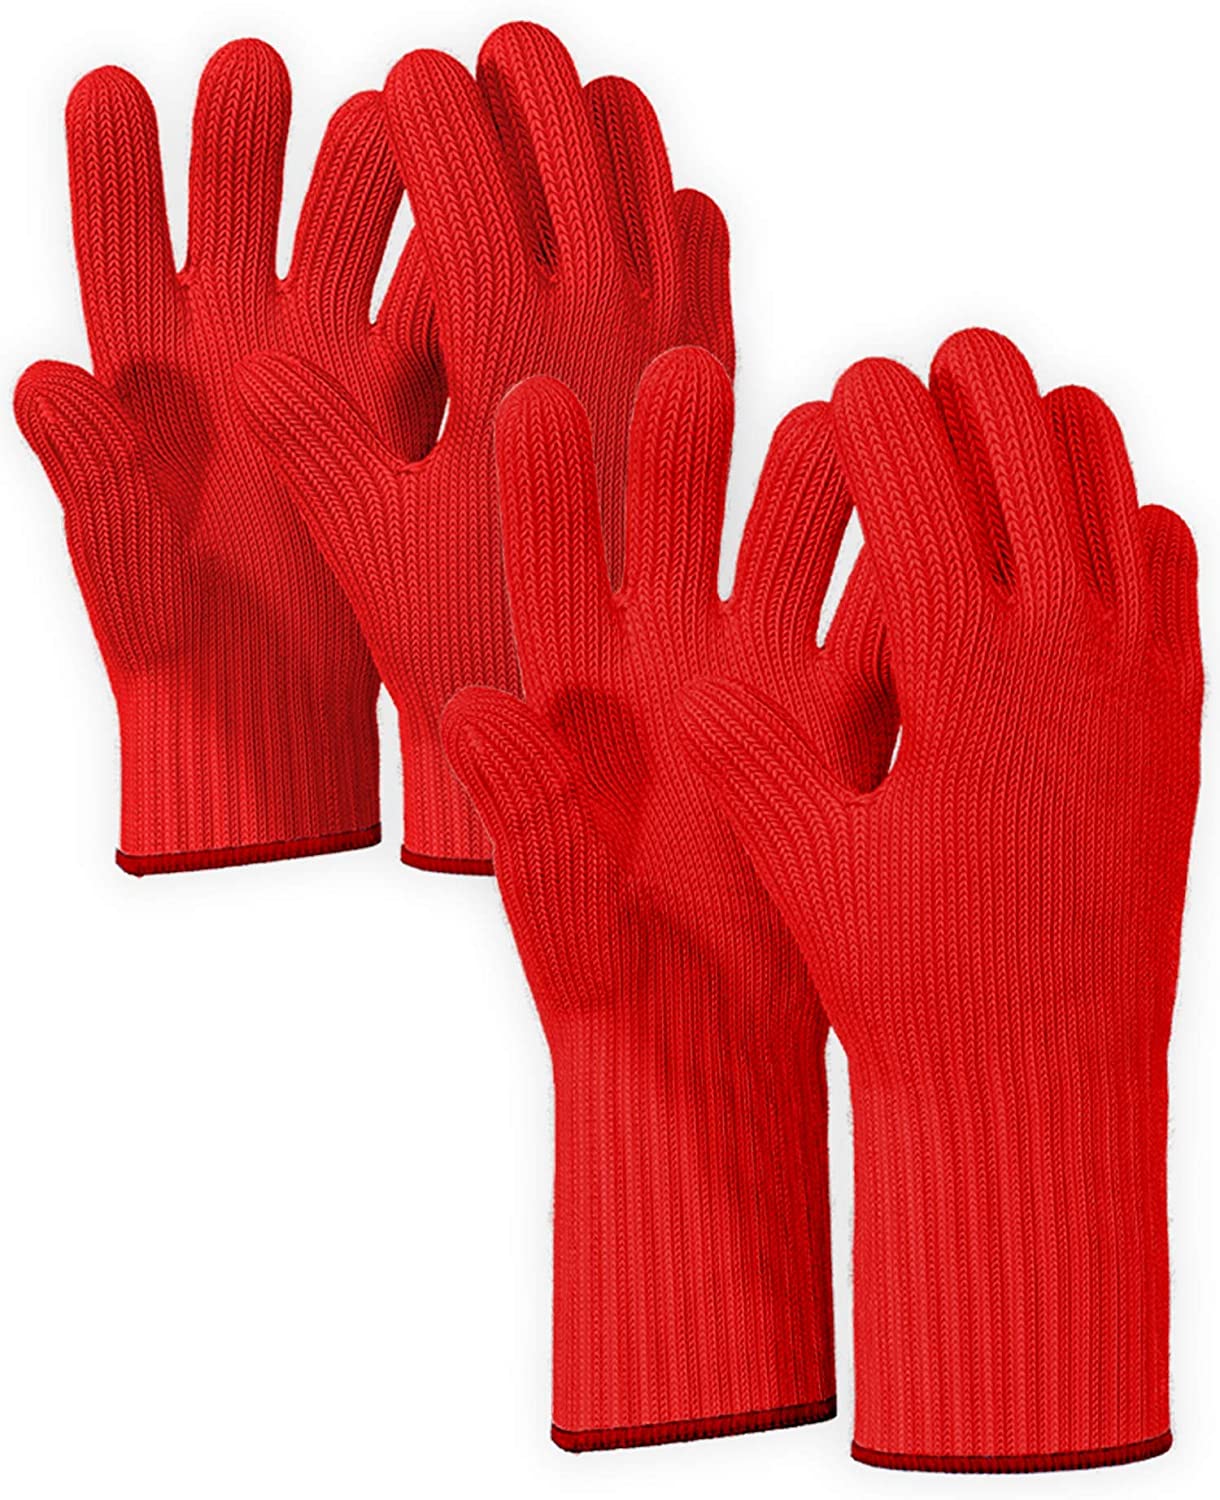 Long Sleeve Heat Resistant Gloves Oven Gloves Heat Resistant with Fingers  Oven Mitts Kitchen Pot Holders Cotton Gloves Long Kitchen Gloves Double  Oven